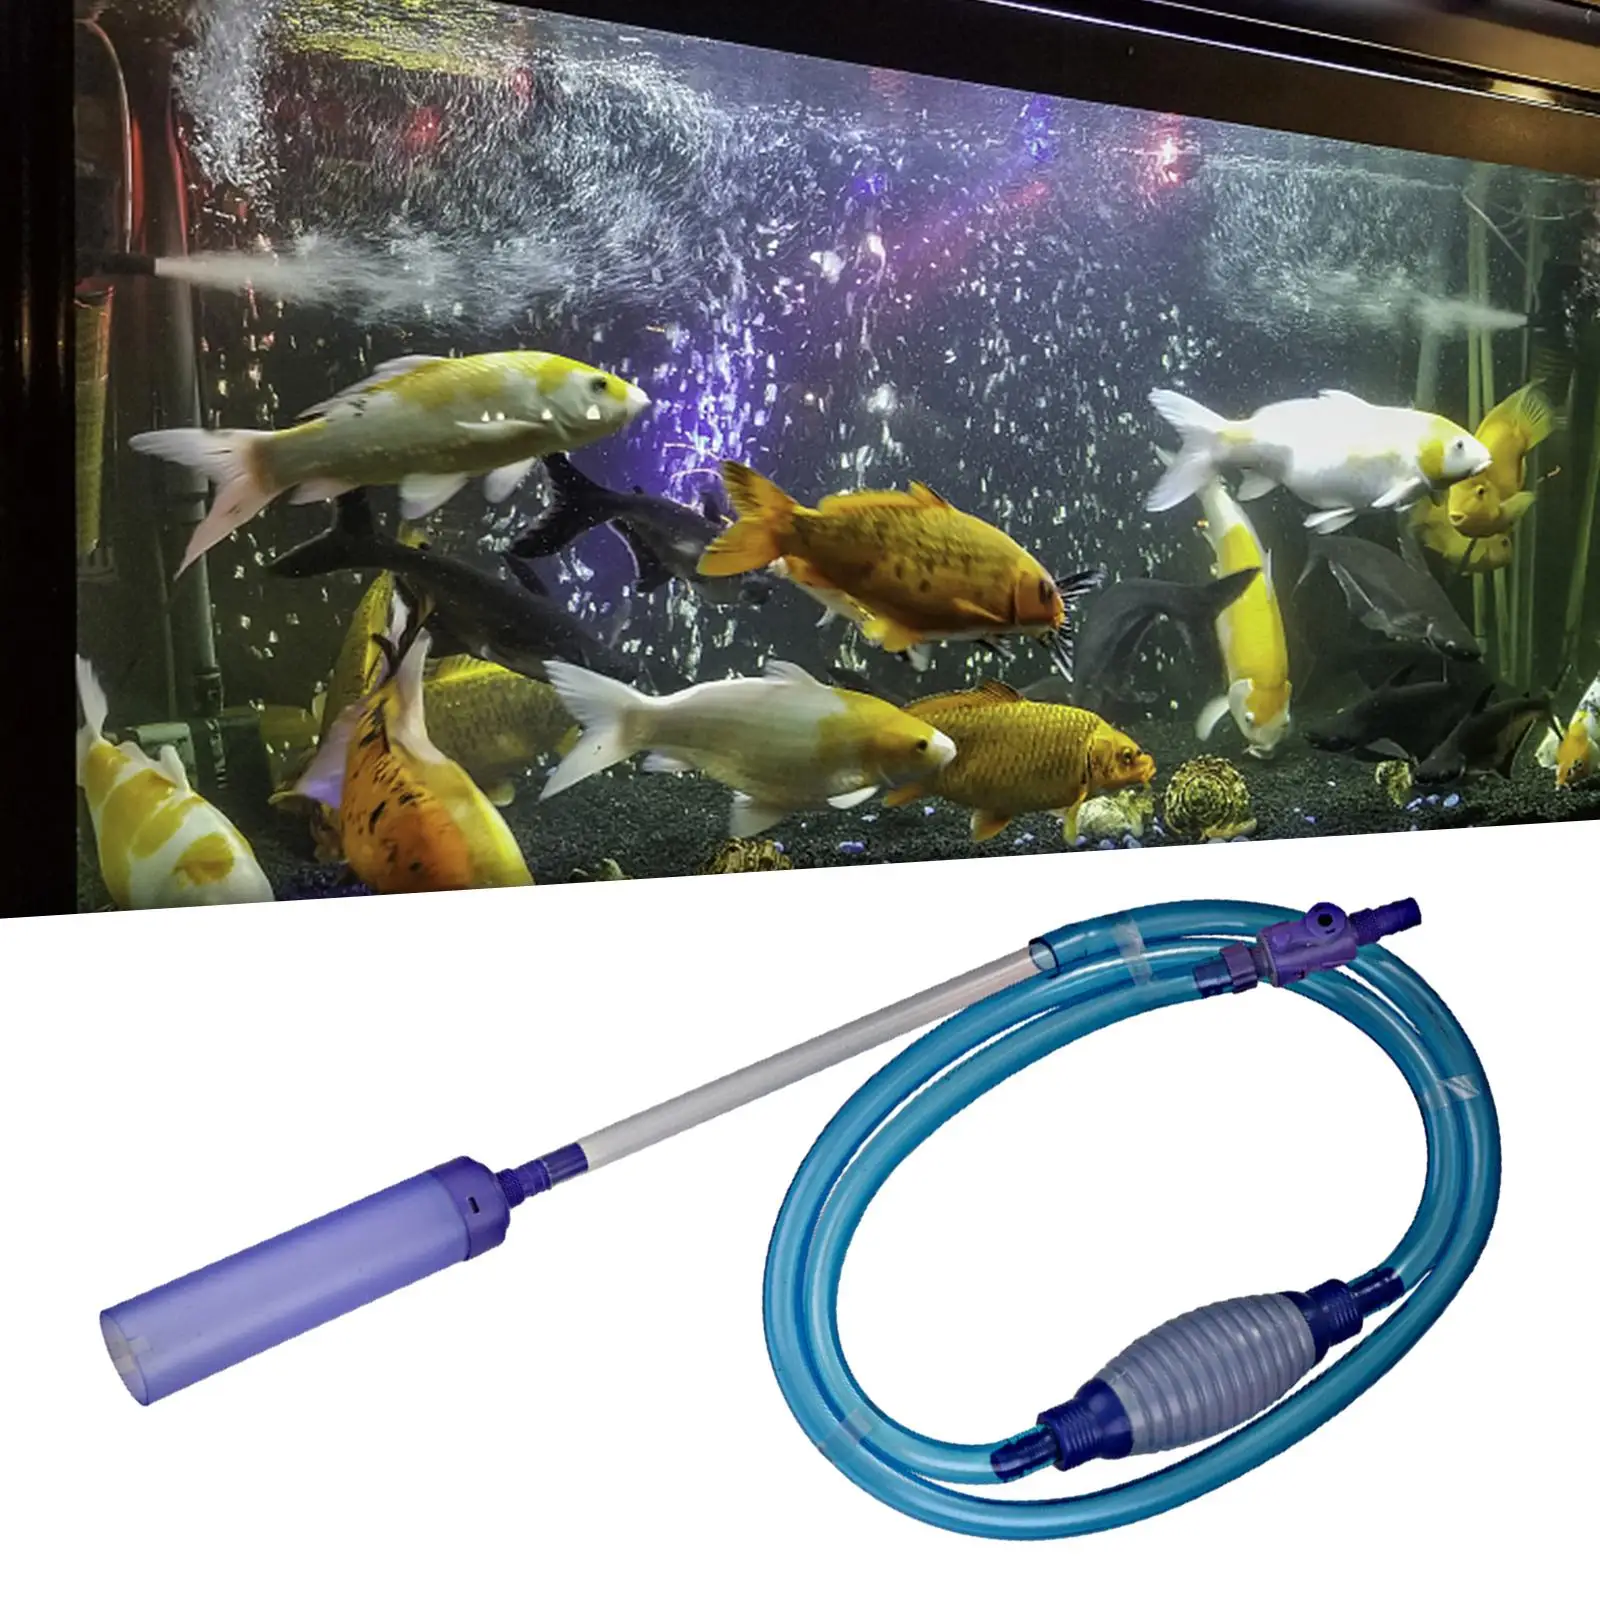 Fish Tank Water Change Water Filter Sand Cleaner for Fish Tank Quick Water Change Aquarium Cleaning Sand Washing Accessory